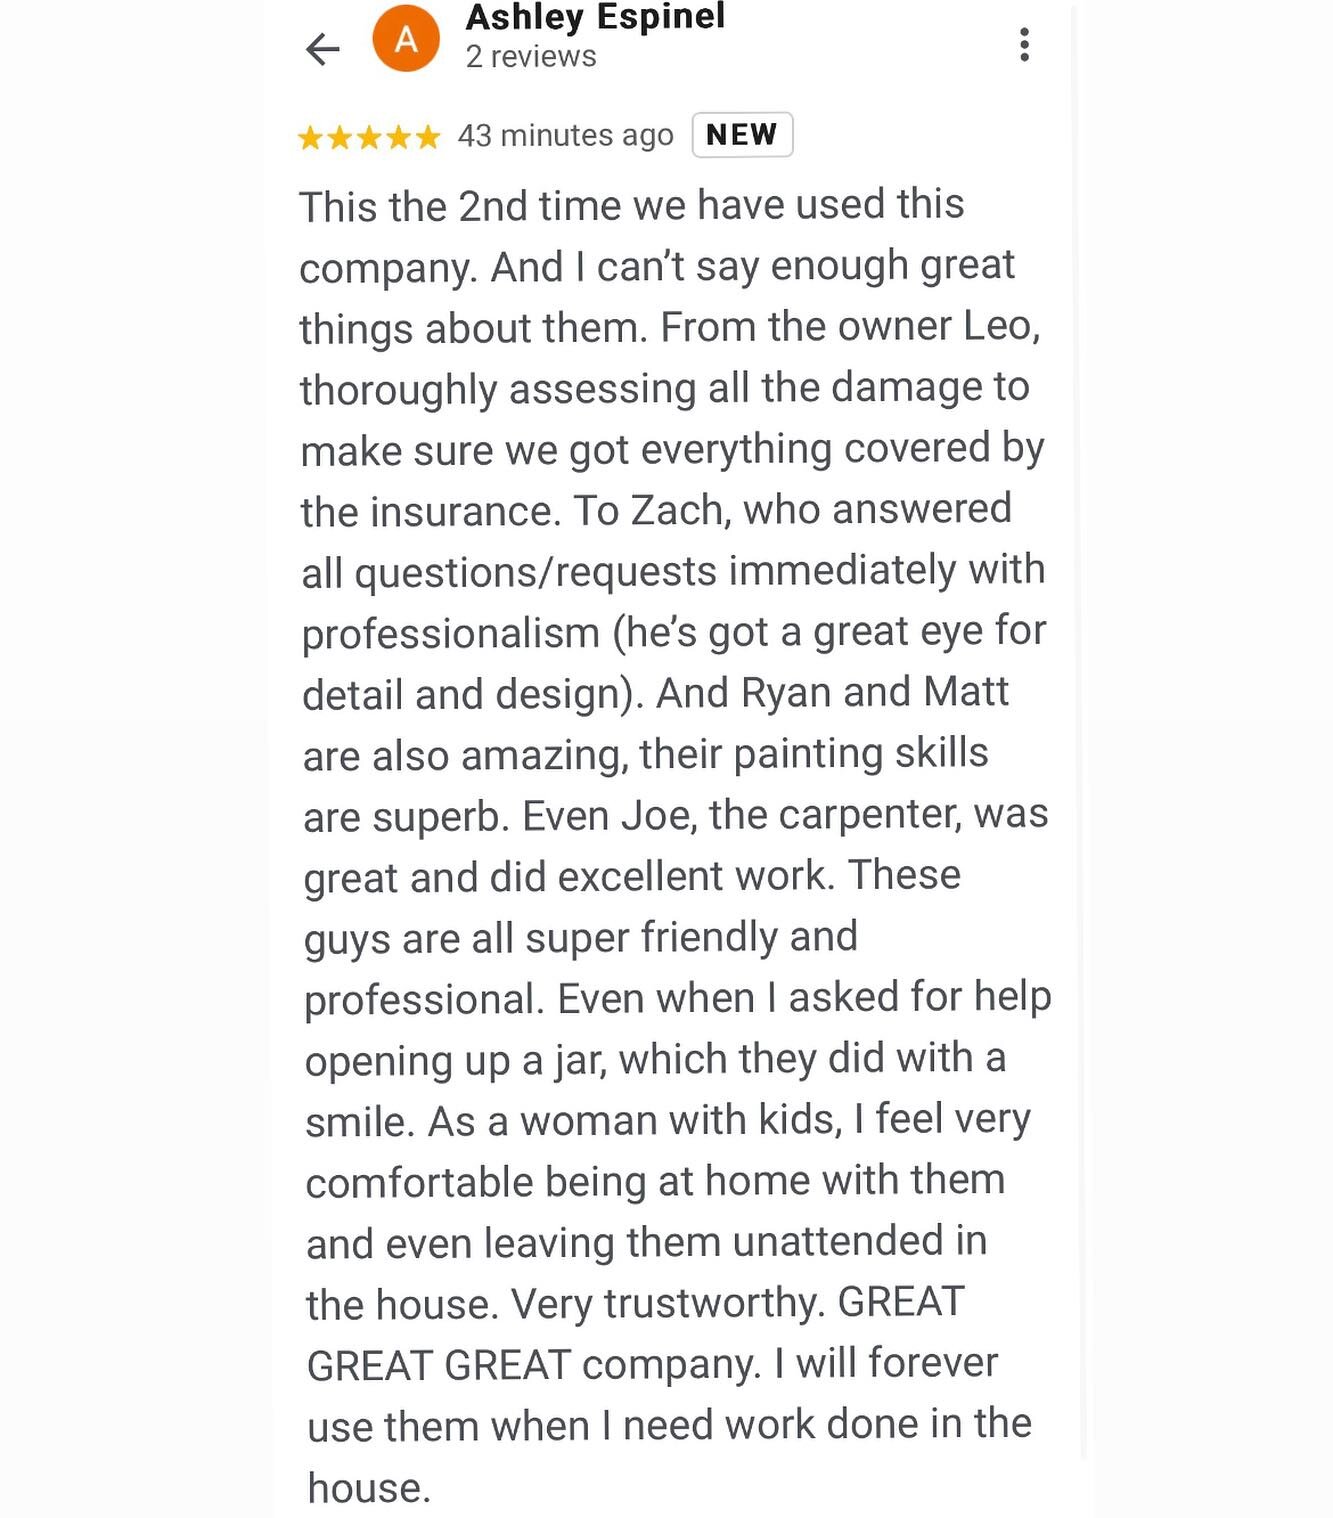 It's a great feeling to know we're improving other people's lives through the work we do. Check out this thoughtful review we just got from a happy customer.